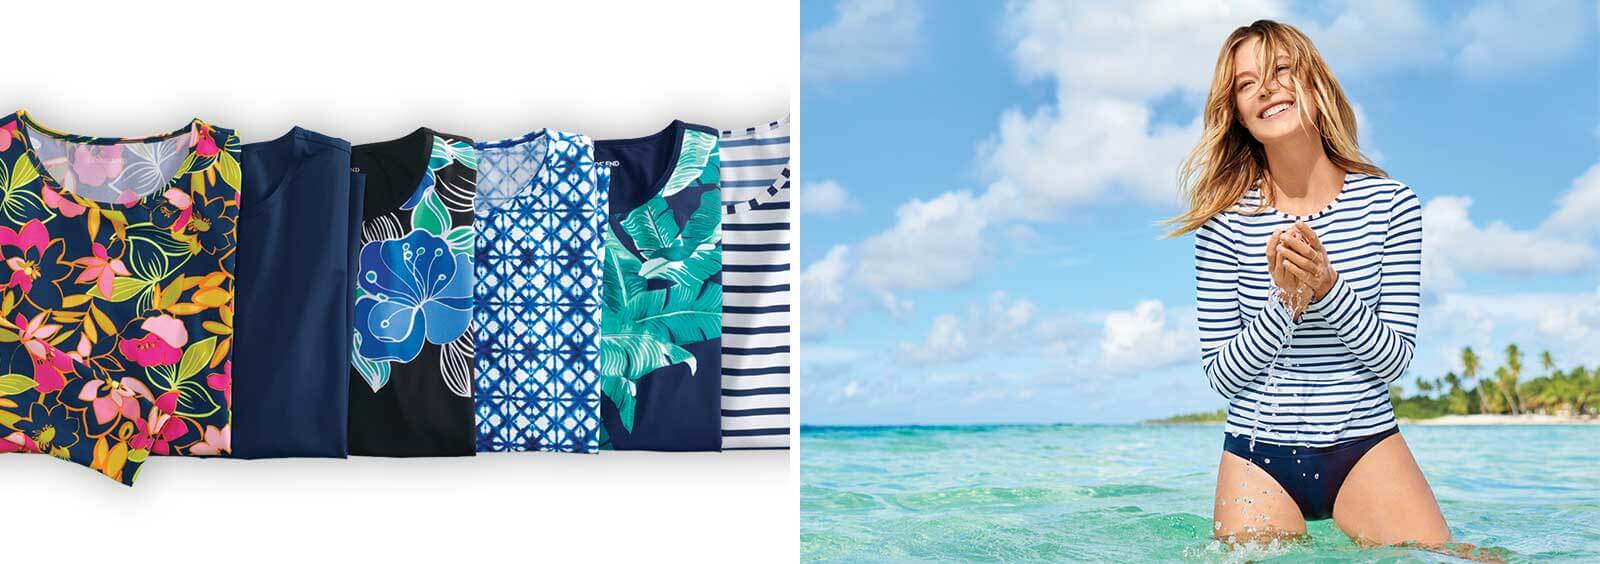 The Best Rash Guards for Vacation